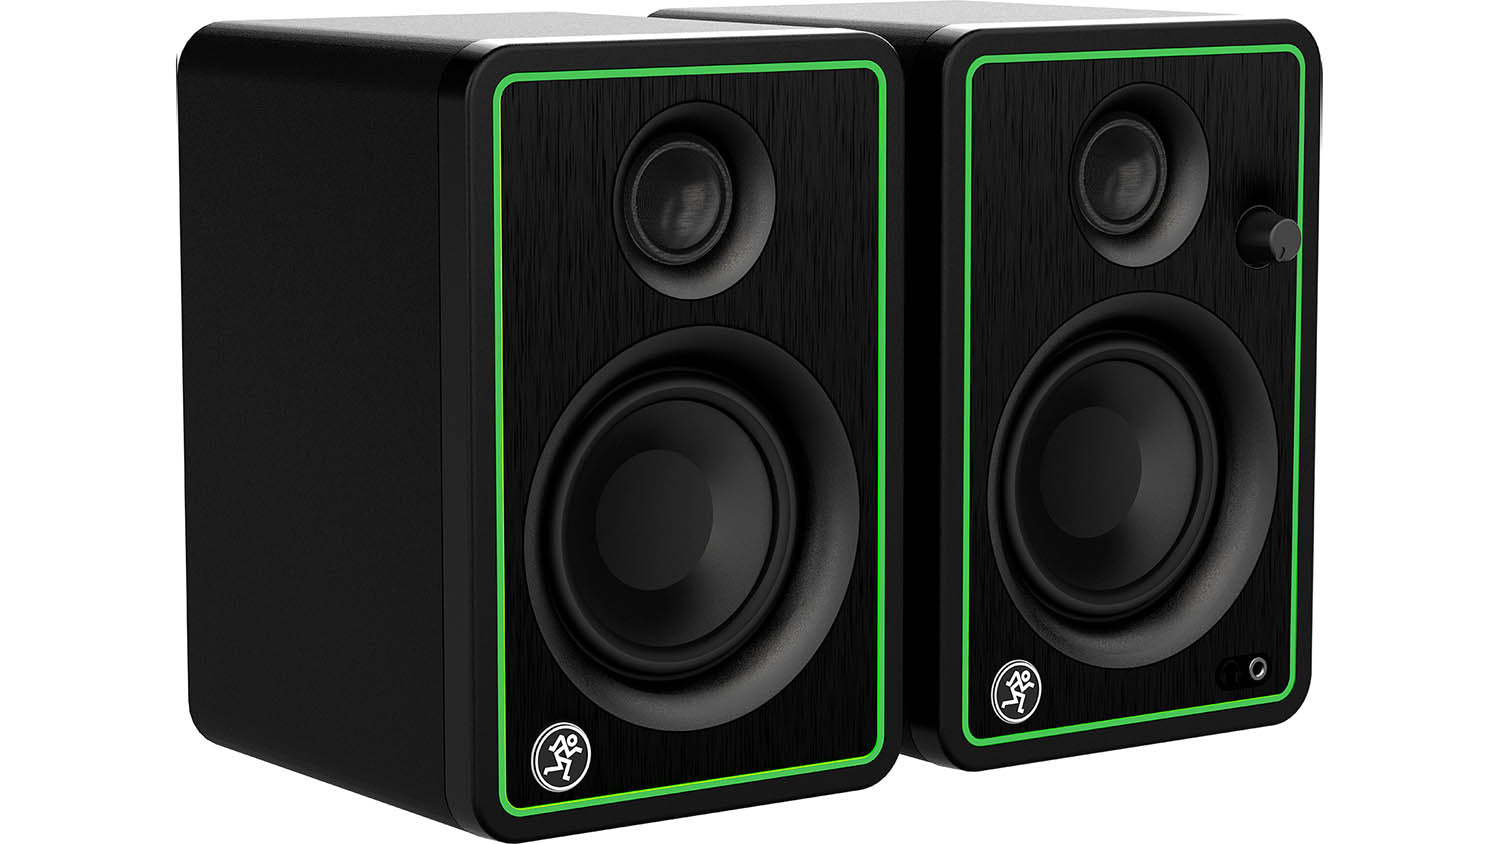 Mackie CR3-XBT, 3 Inches Creative Reference Multimedia Monitors With Bluetooth - Pair Mackie